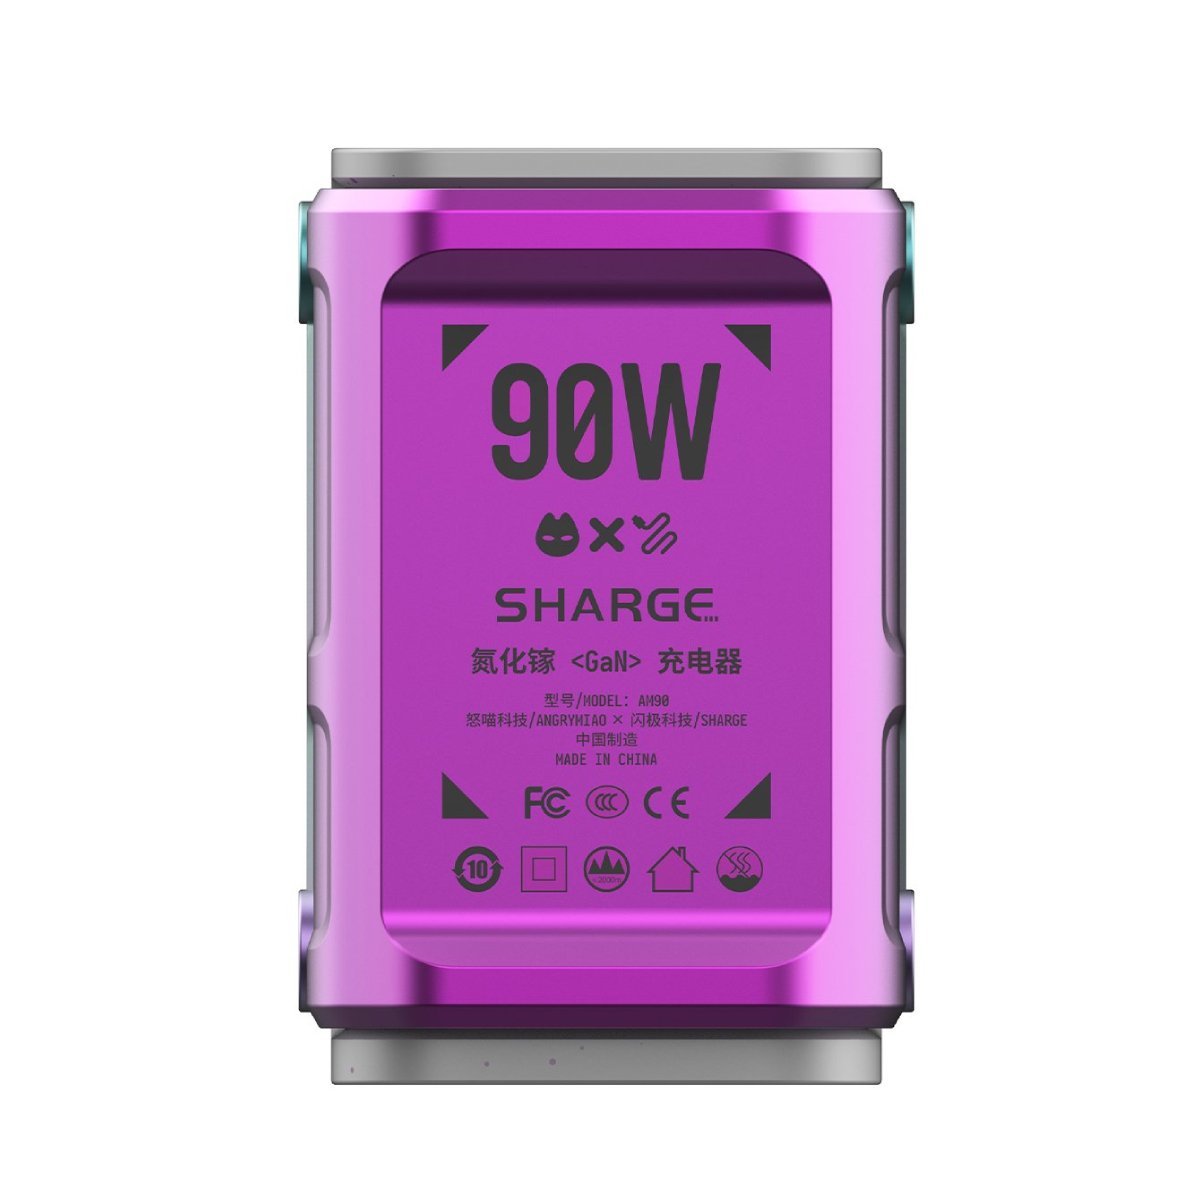 AngryMiao CyberCharge 90W Compact GaN Charger- Neon Purple - Store 974 | ستور ٩٧٤